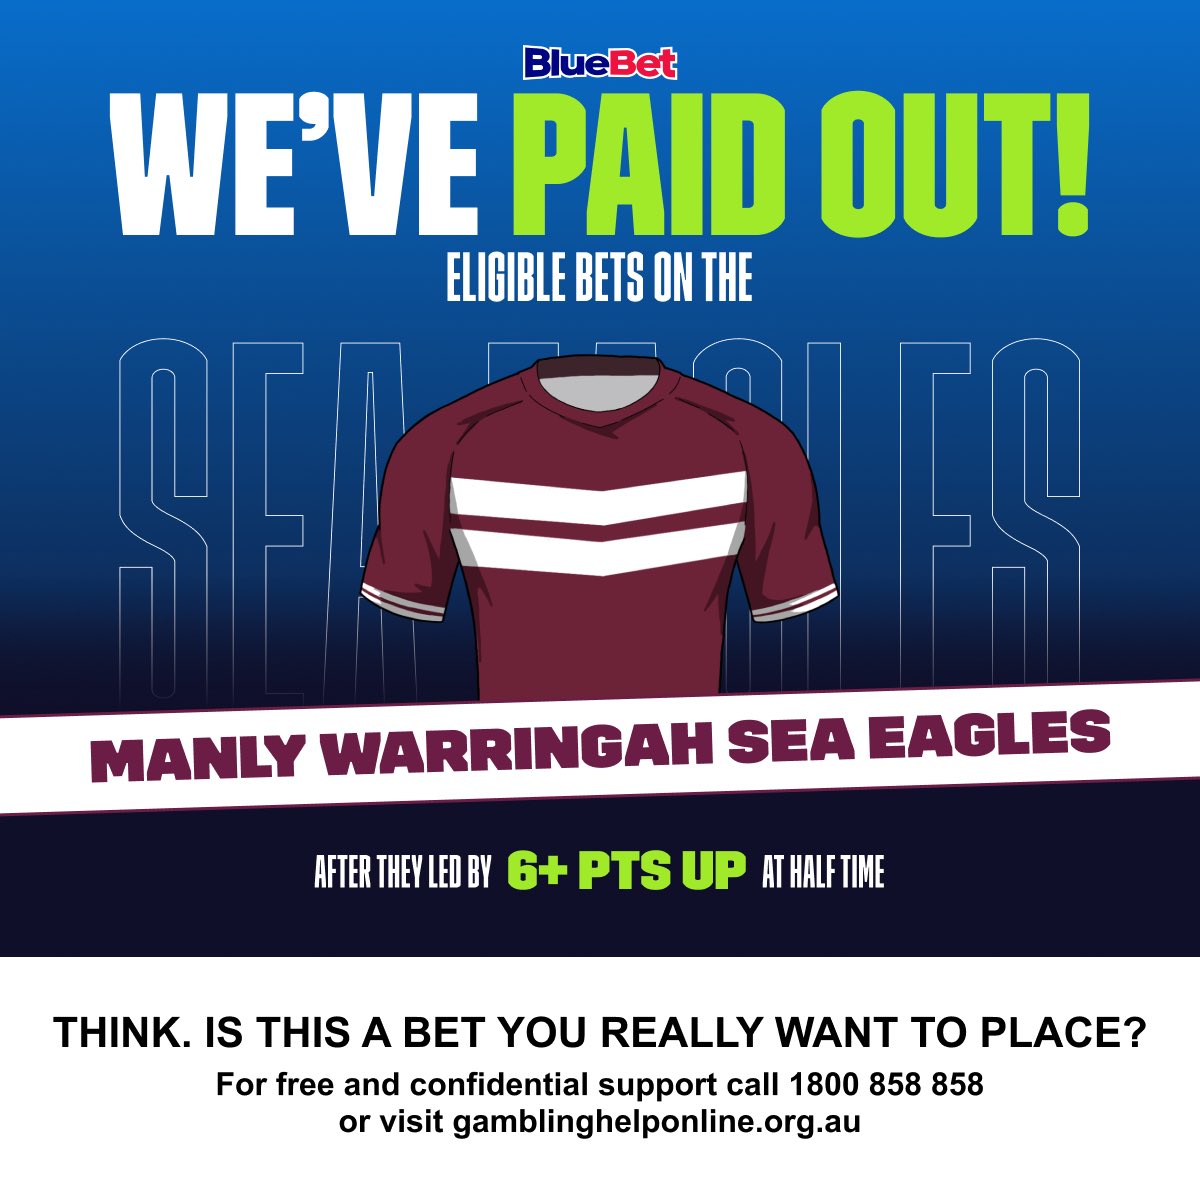 Manly punters, we’ve paid you out at half time as winners. Take a half day.